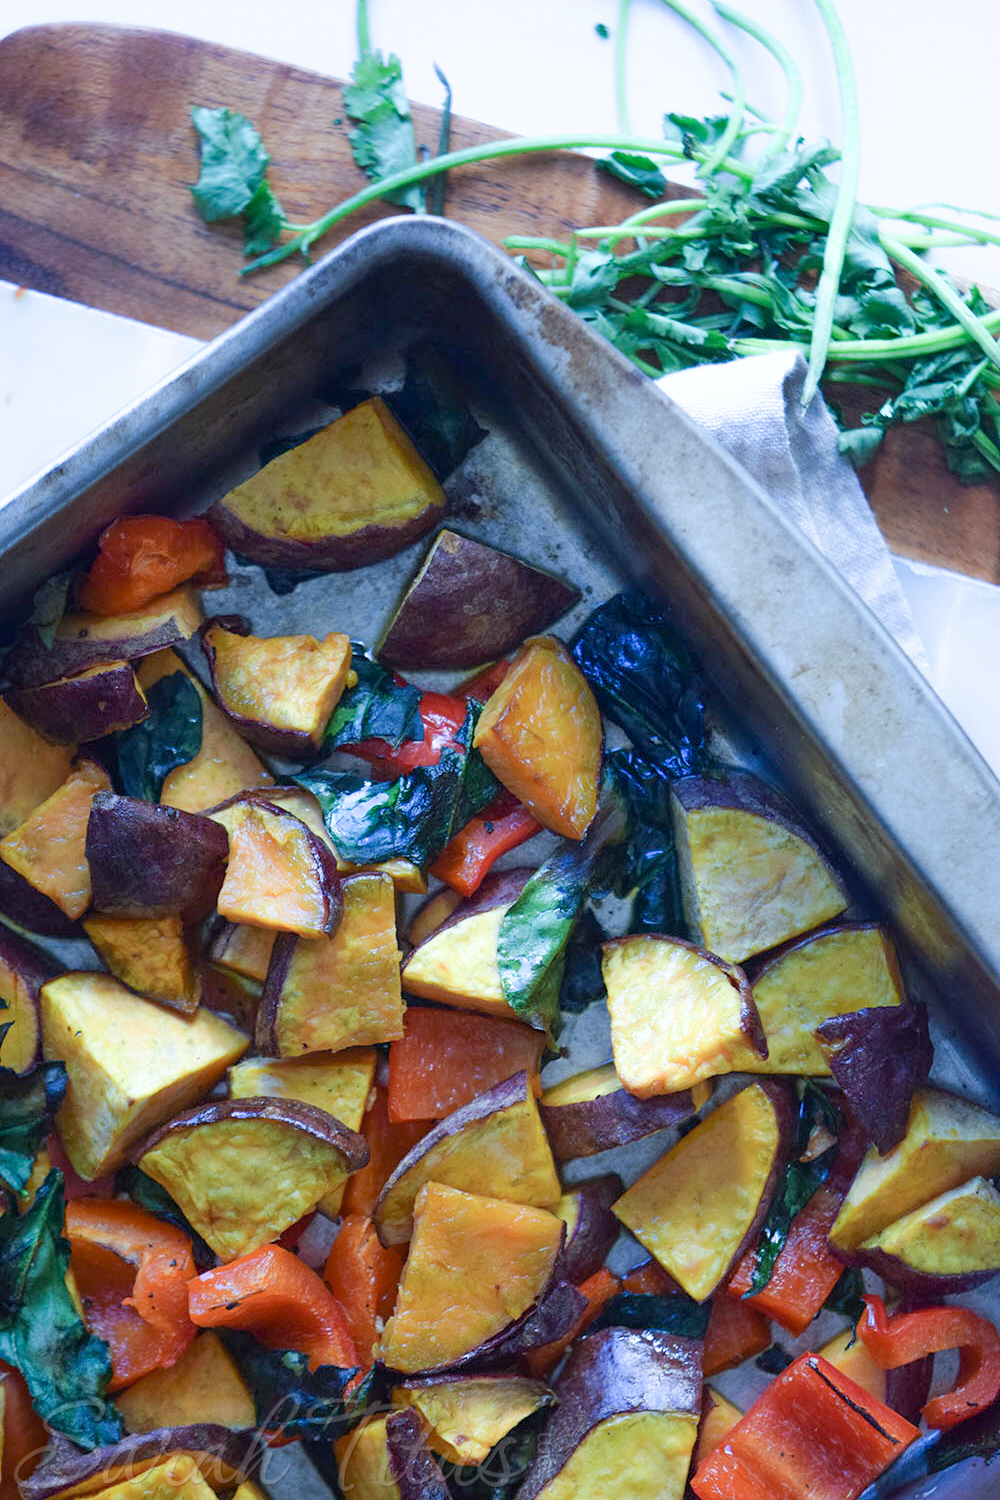 Sweet potatoes, red pepper and spinach pieces spread on a metal baking sheet ready to go in the oven